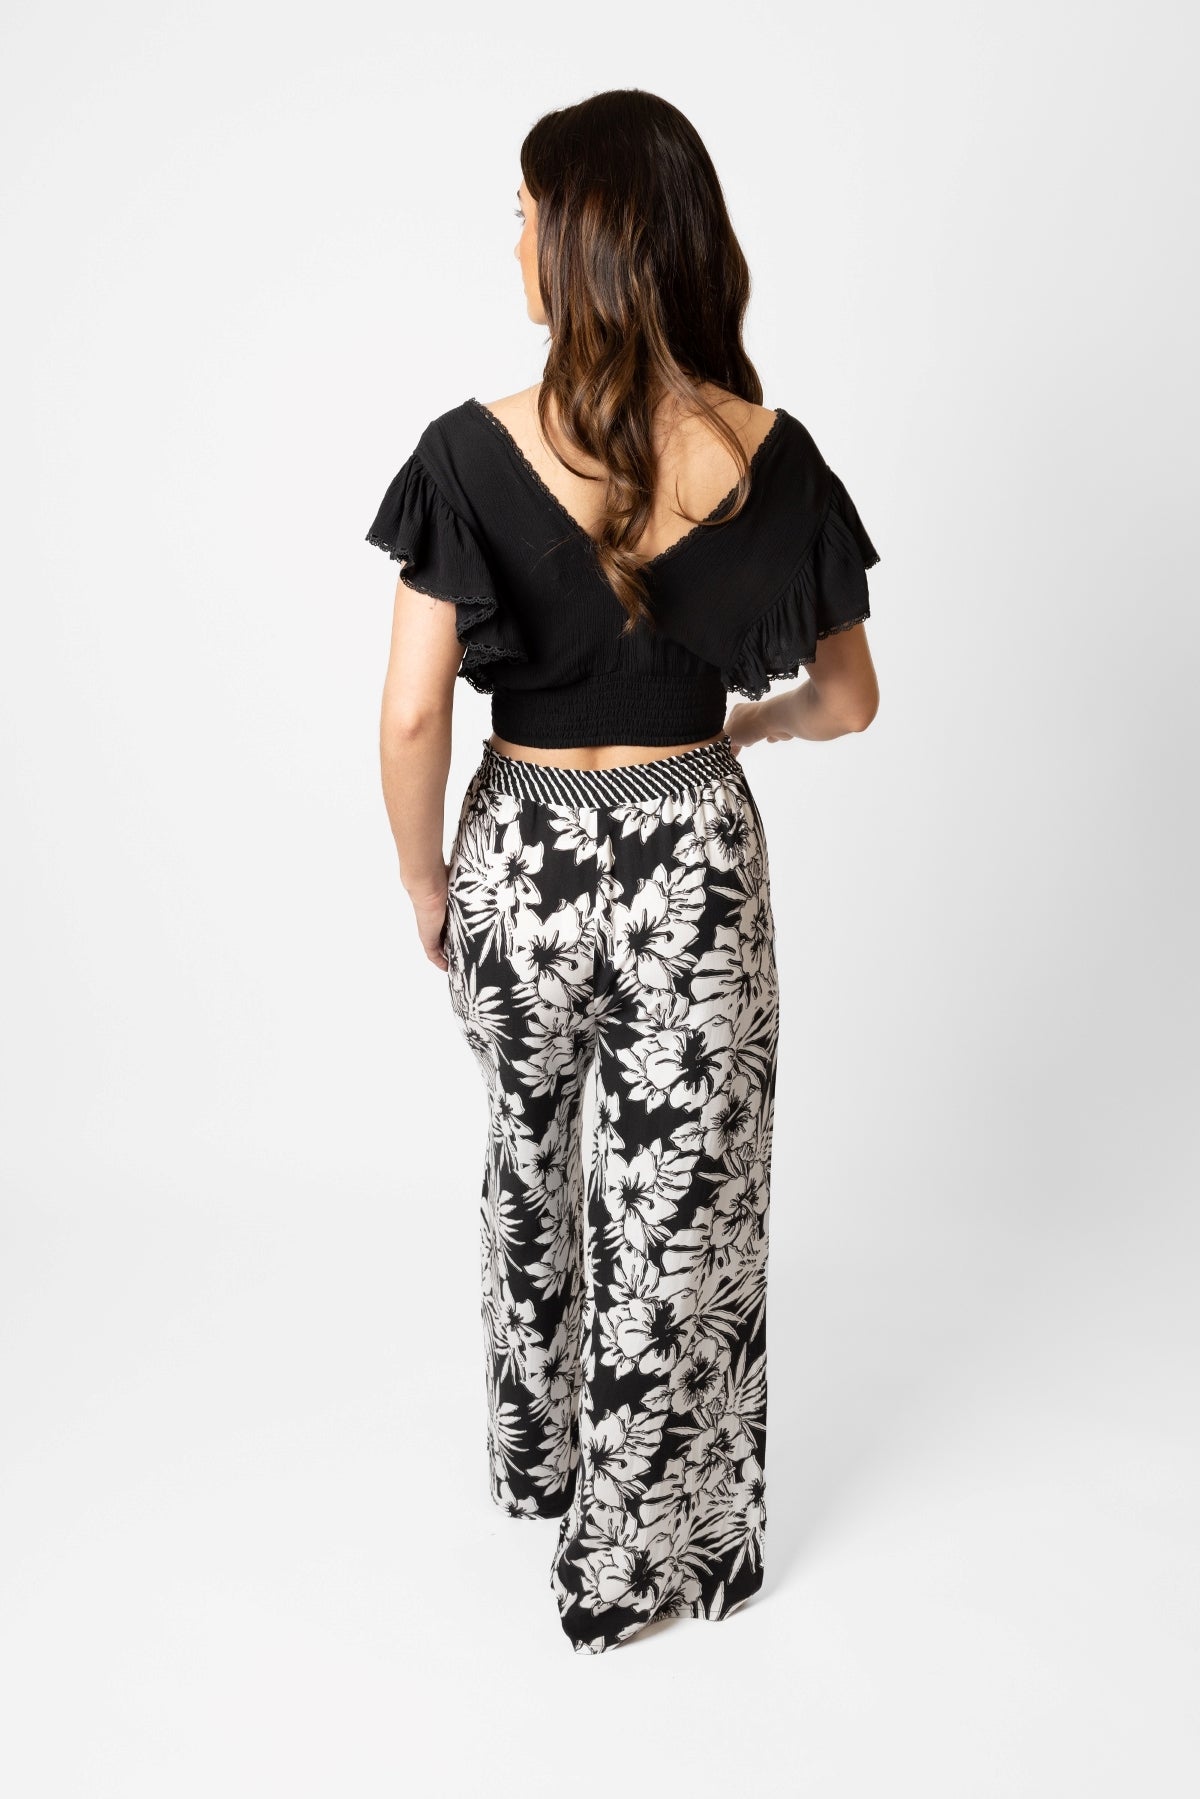 Brunette model facing back, wearing Black Onyx Copacabana Floral Wide Leg Pant. Features a vibrant hibiscus floral print, wide leg palazzo style, and an adjustable cinched waist with pockets. Crafted from 100% sand-washed rayon, perfect for a garden-chic look or vacation style. Koy Resort affordable vacation, cruise, and resort-wear.